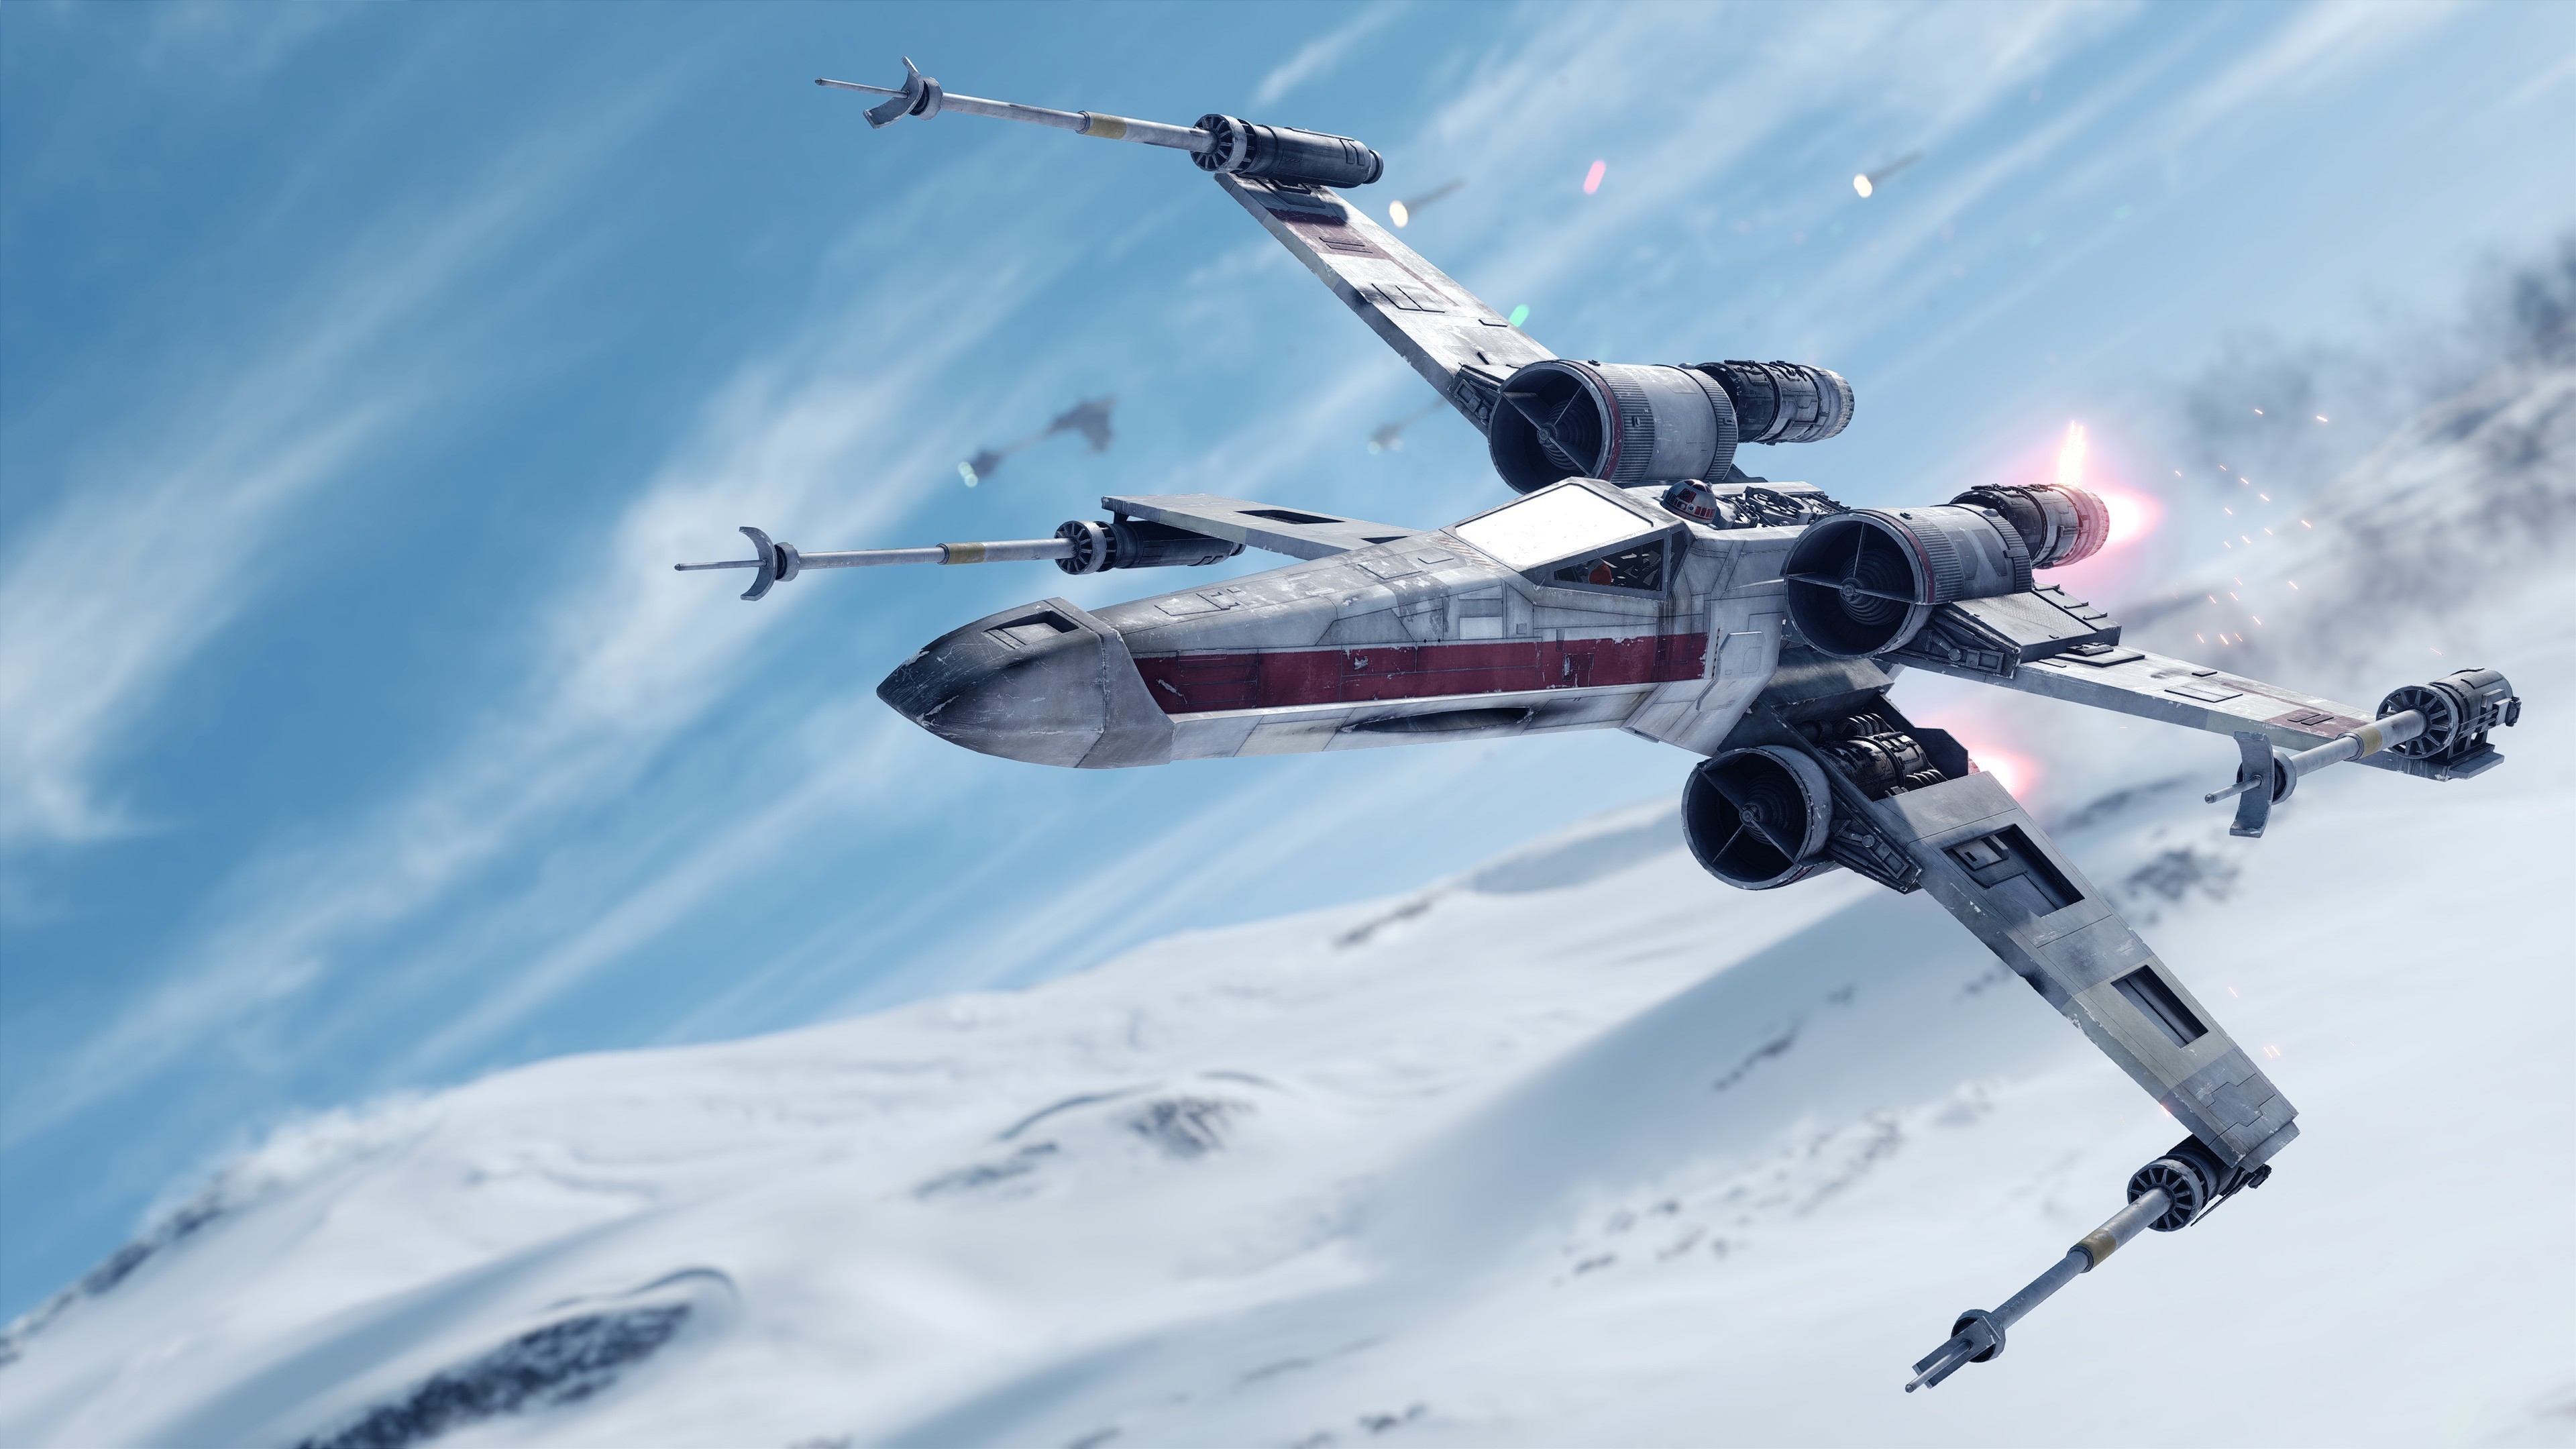 General 3840x2160 Star Wars X-wing science fiction CGI vehicle spaceship Star Wars: Battlefront video games PC gaming video game art Star Wars Ships